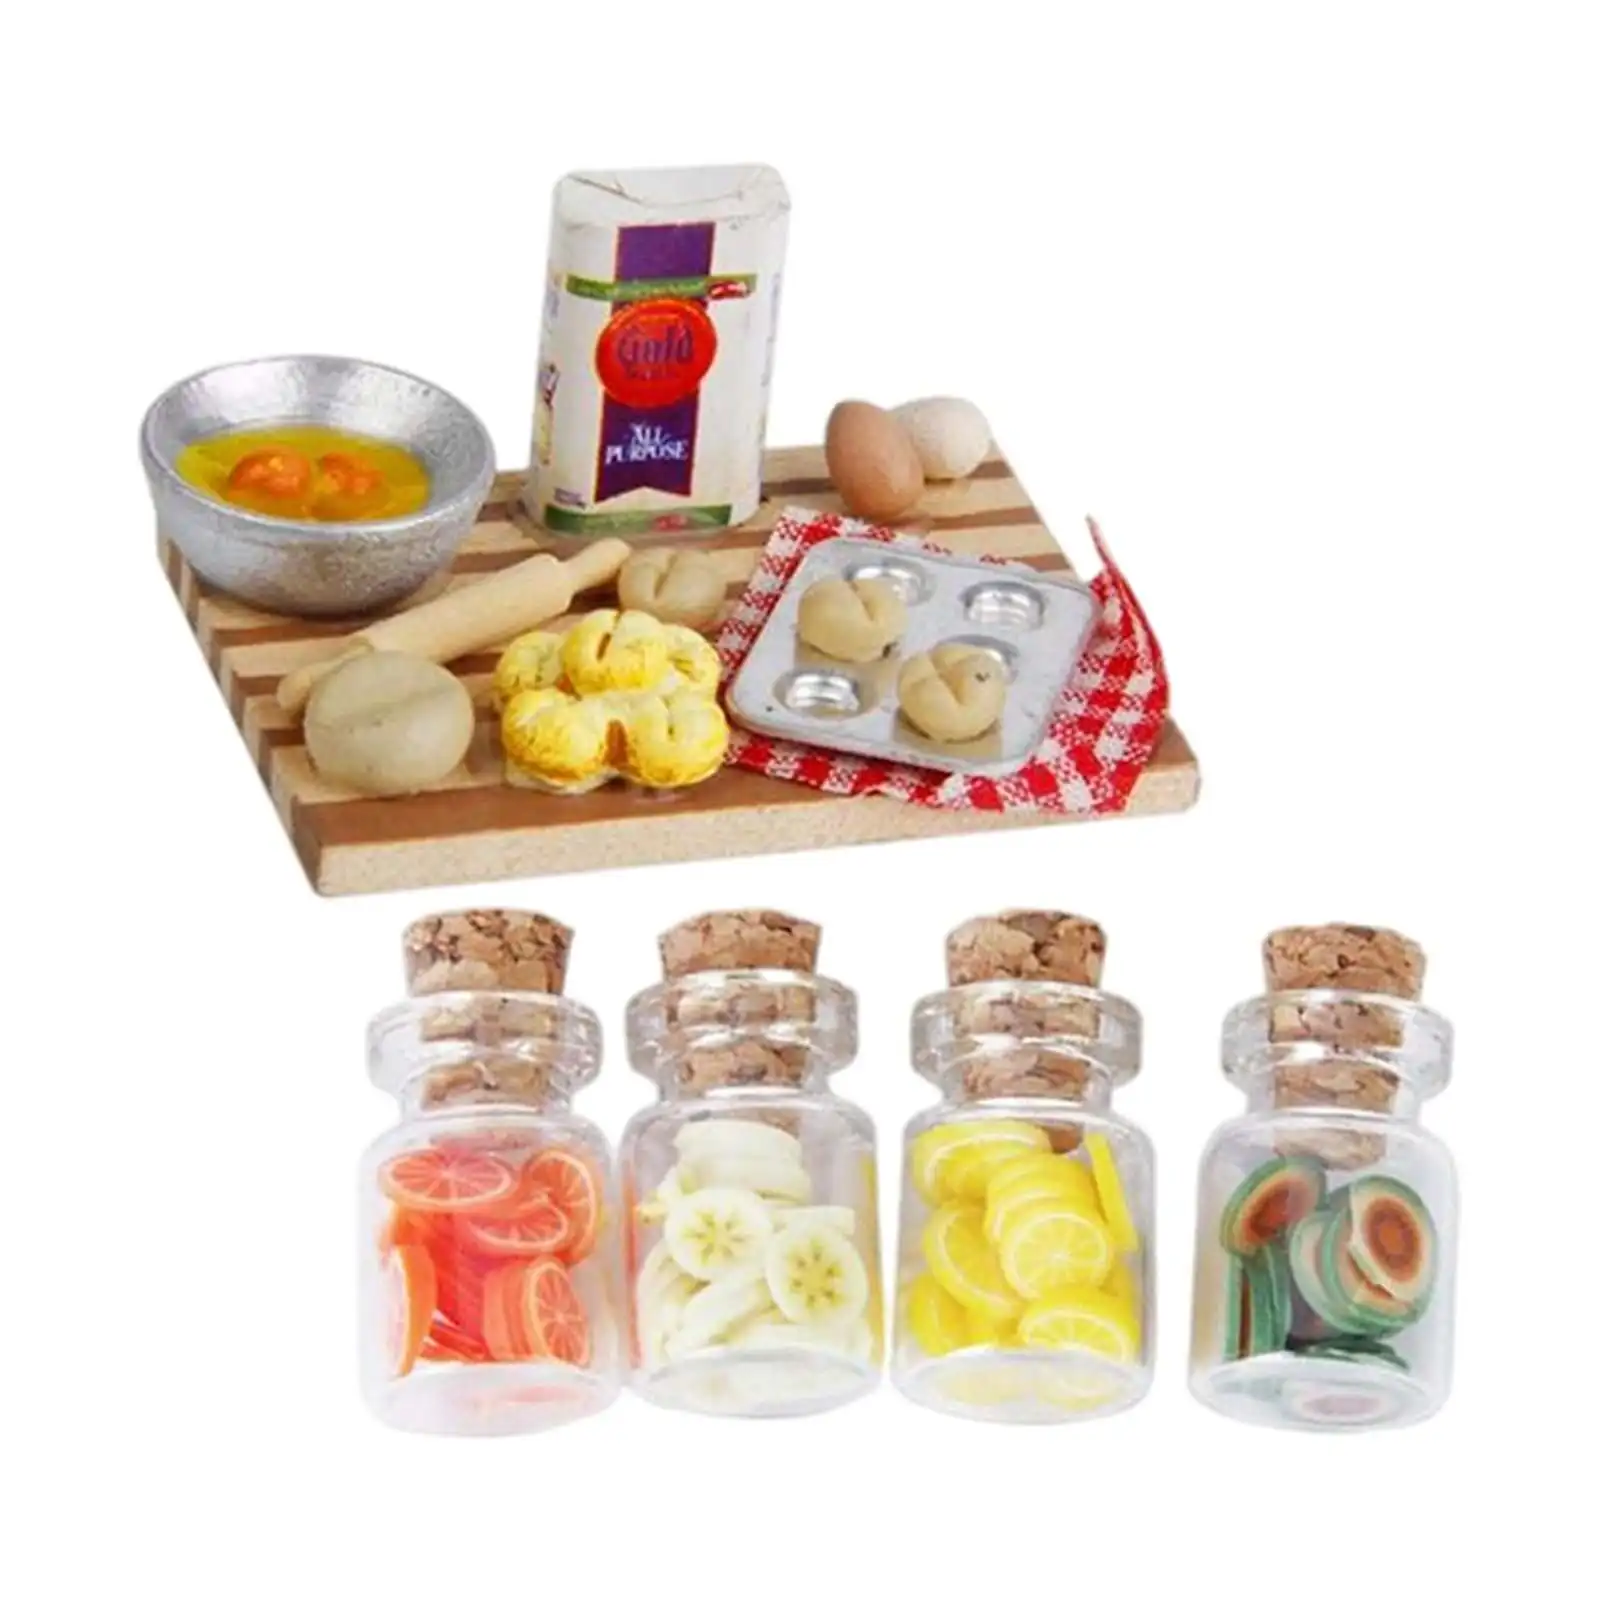 Dolls House Miniature Kitchen Accessory Bottle with Tableware Set